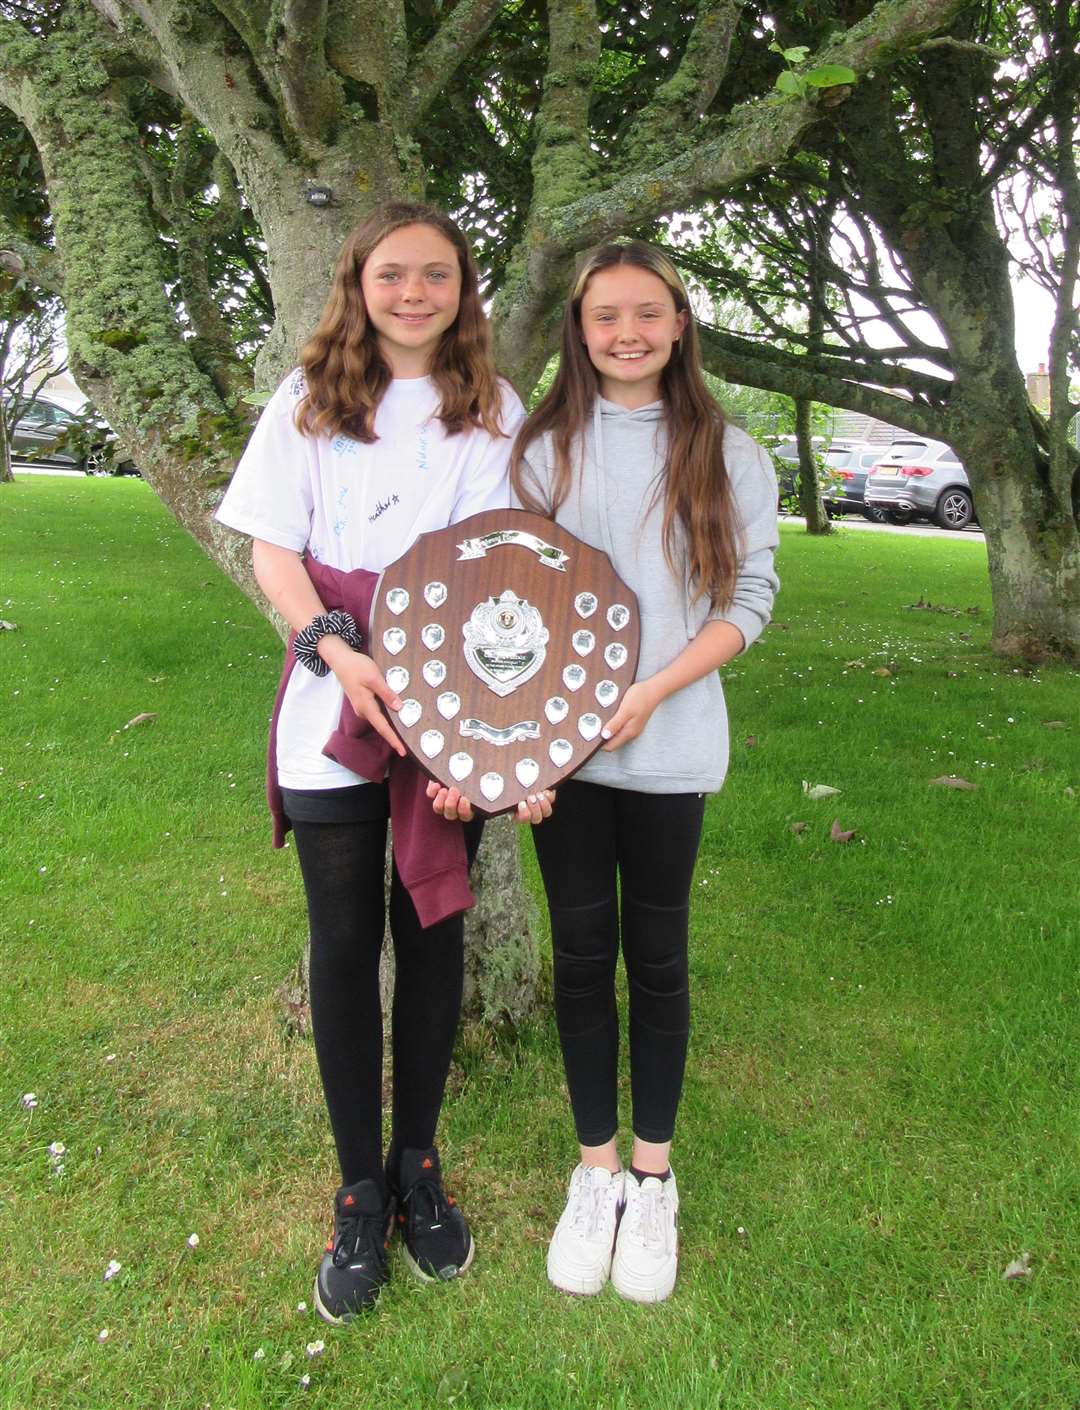 Harald house captains Anna Trueman and Brooke O’Hare with the winners' shield for the sports day challenge.